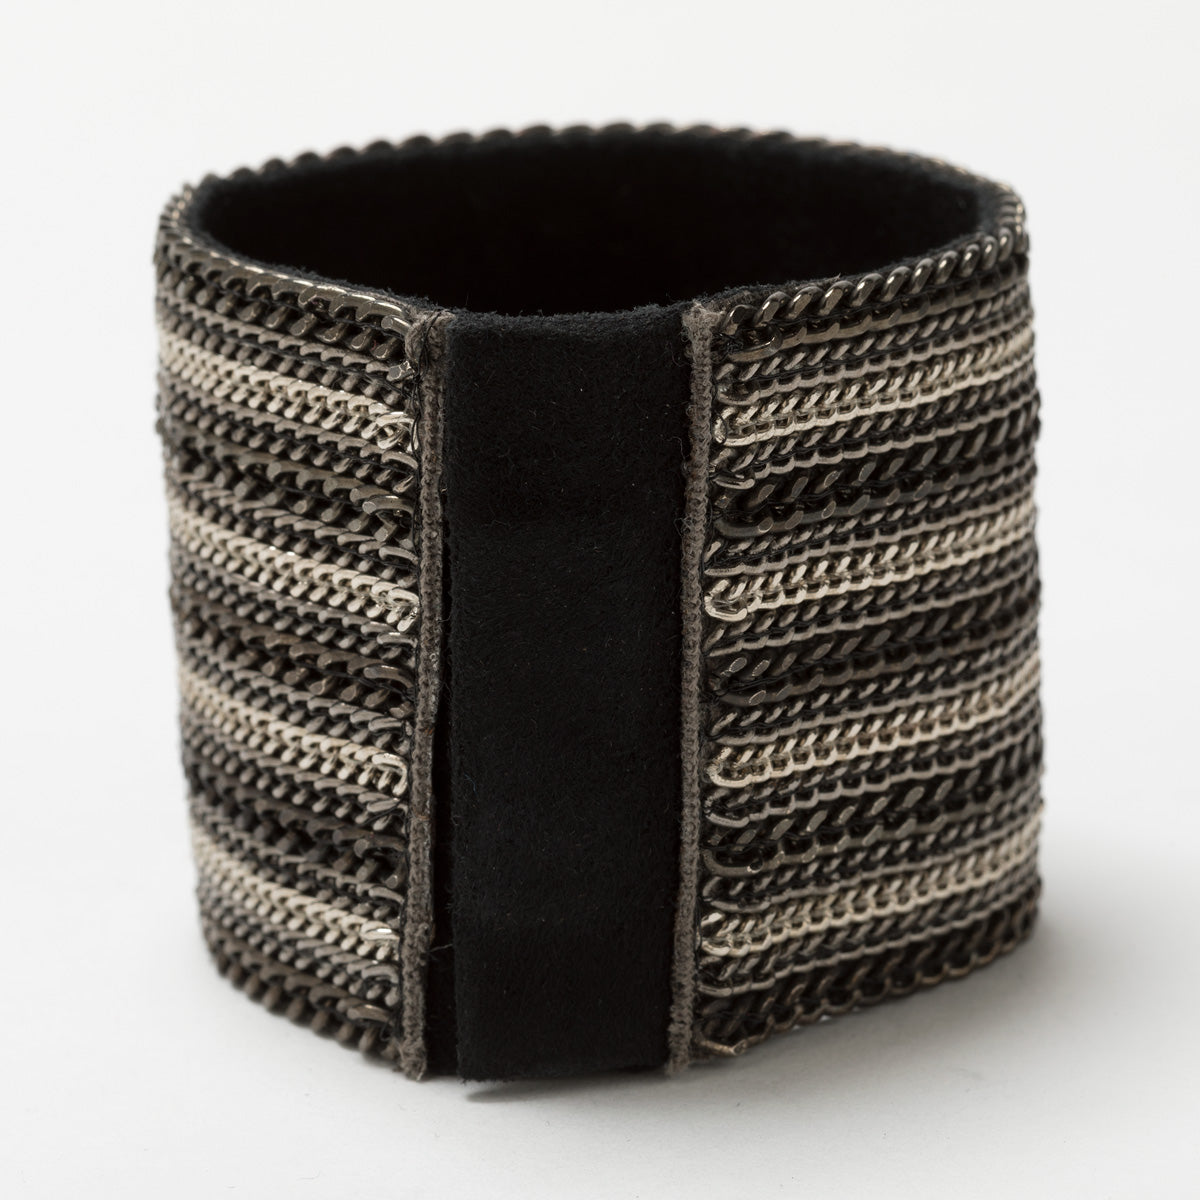 Lori Weitzner Zorya cuff bracelet with chain, suede backing and magnetic closure